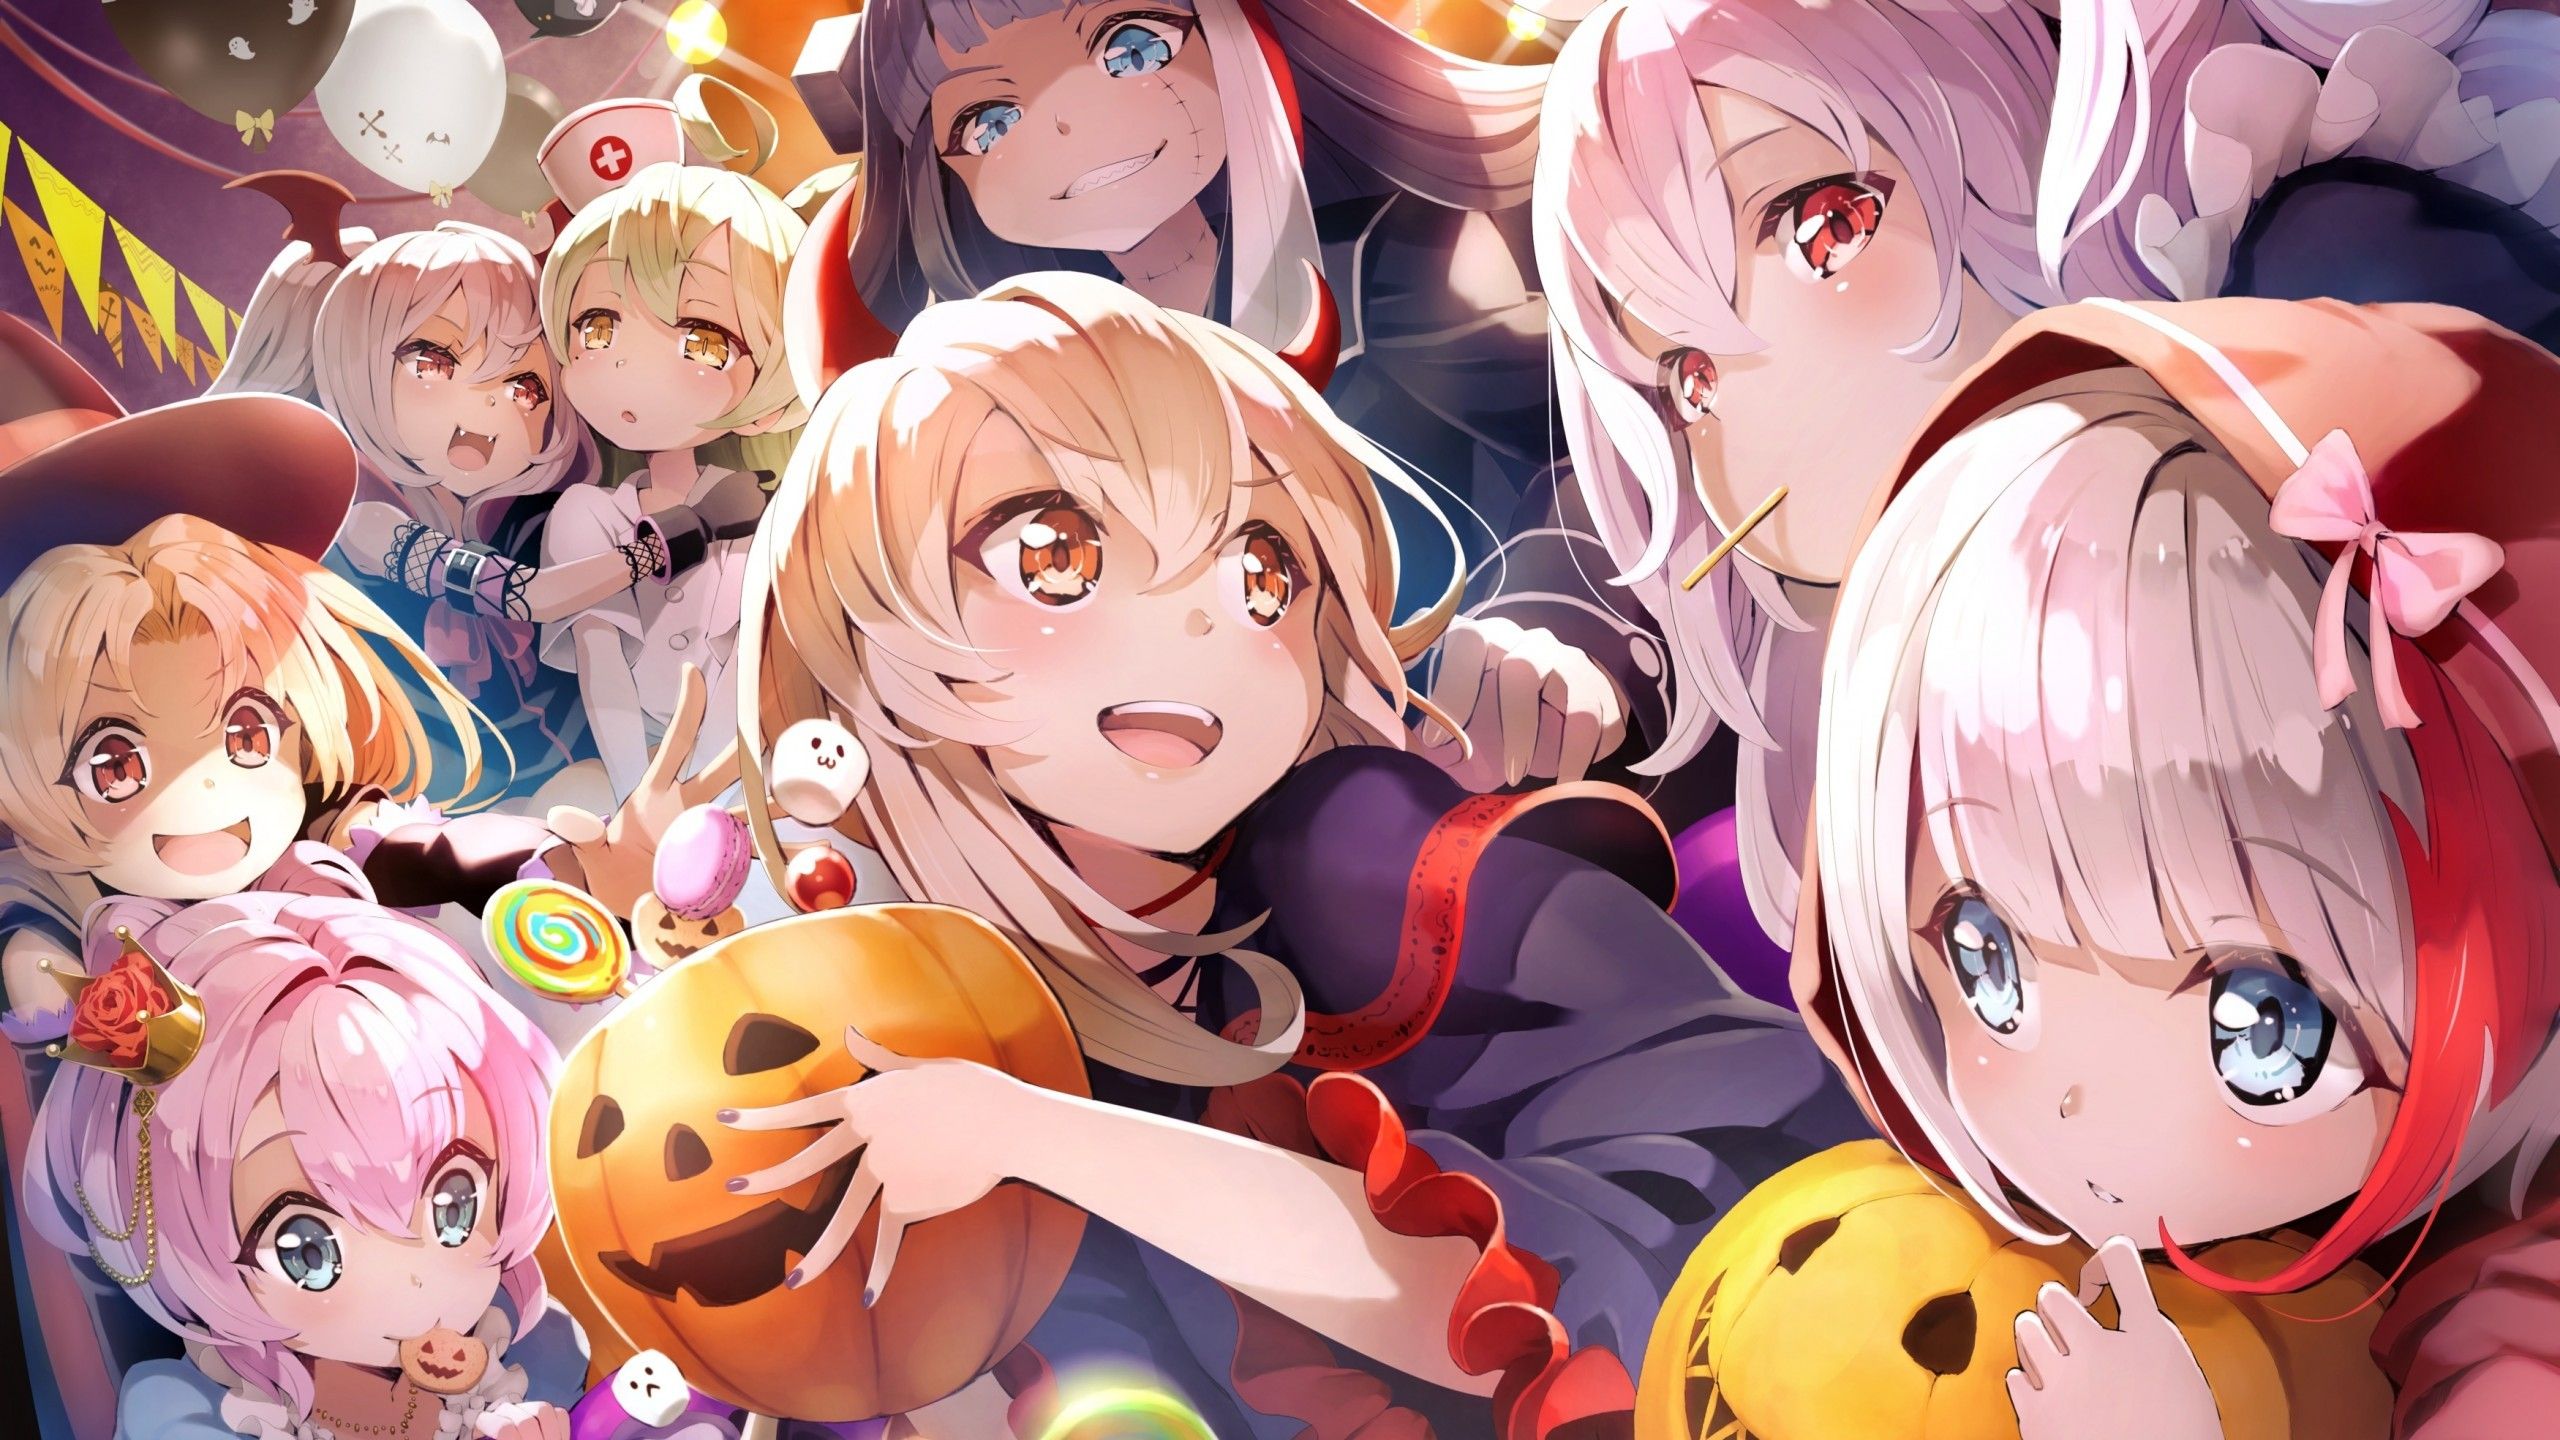 Download 2560x1440 Azur Lane, Halloween Pumpkins, Anime Games, All Characters Wallpaper for iMac 27 inch